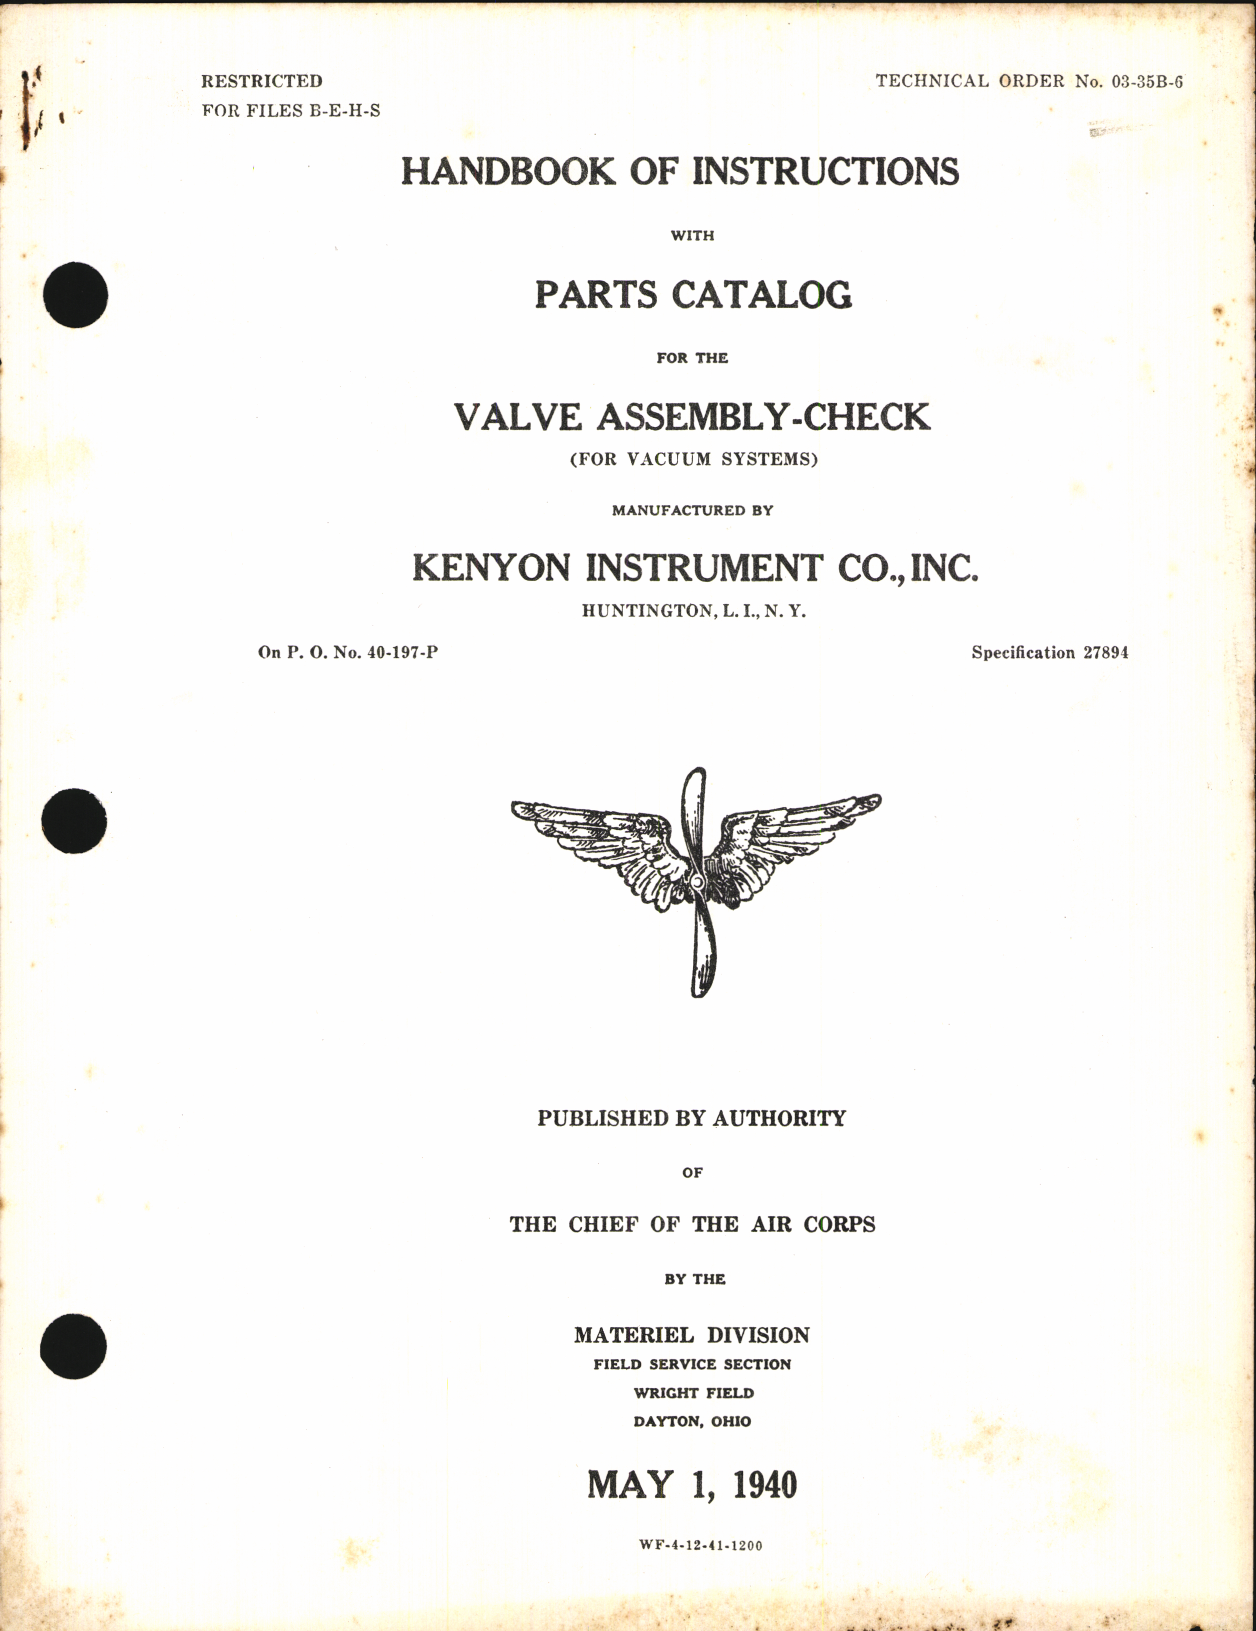 Sample page 1 from AirCorps Library document: Handbook of Instructions with Parts Catalog for Valve Assembly-Check For Vacuum Systems